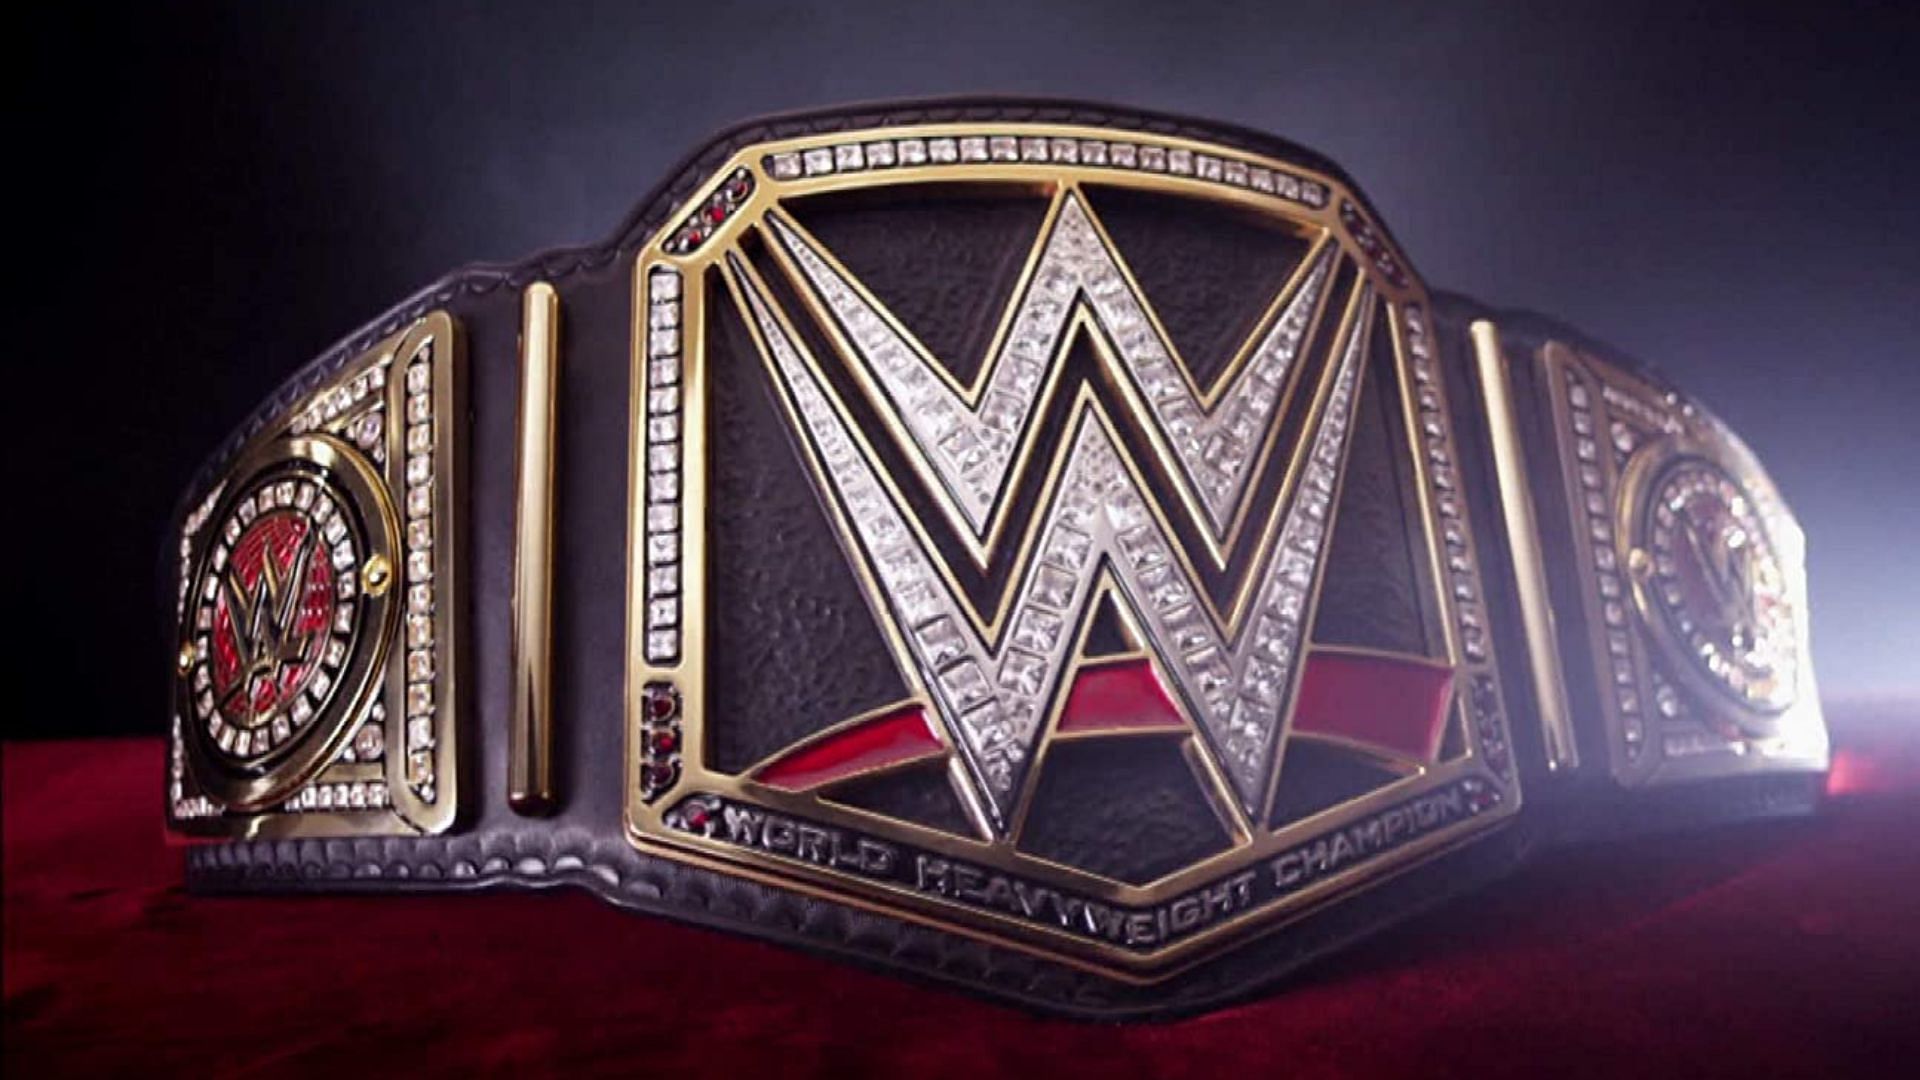  WWE Championship has merged with the Universal Championship